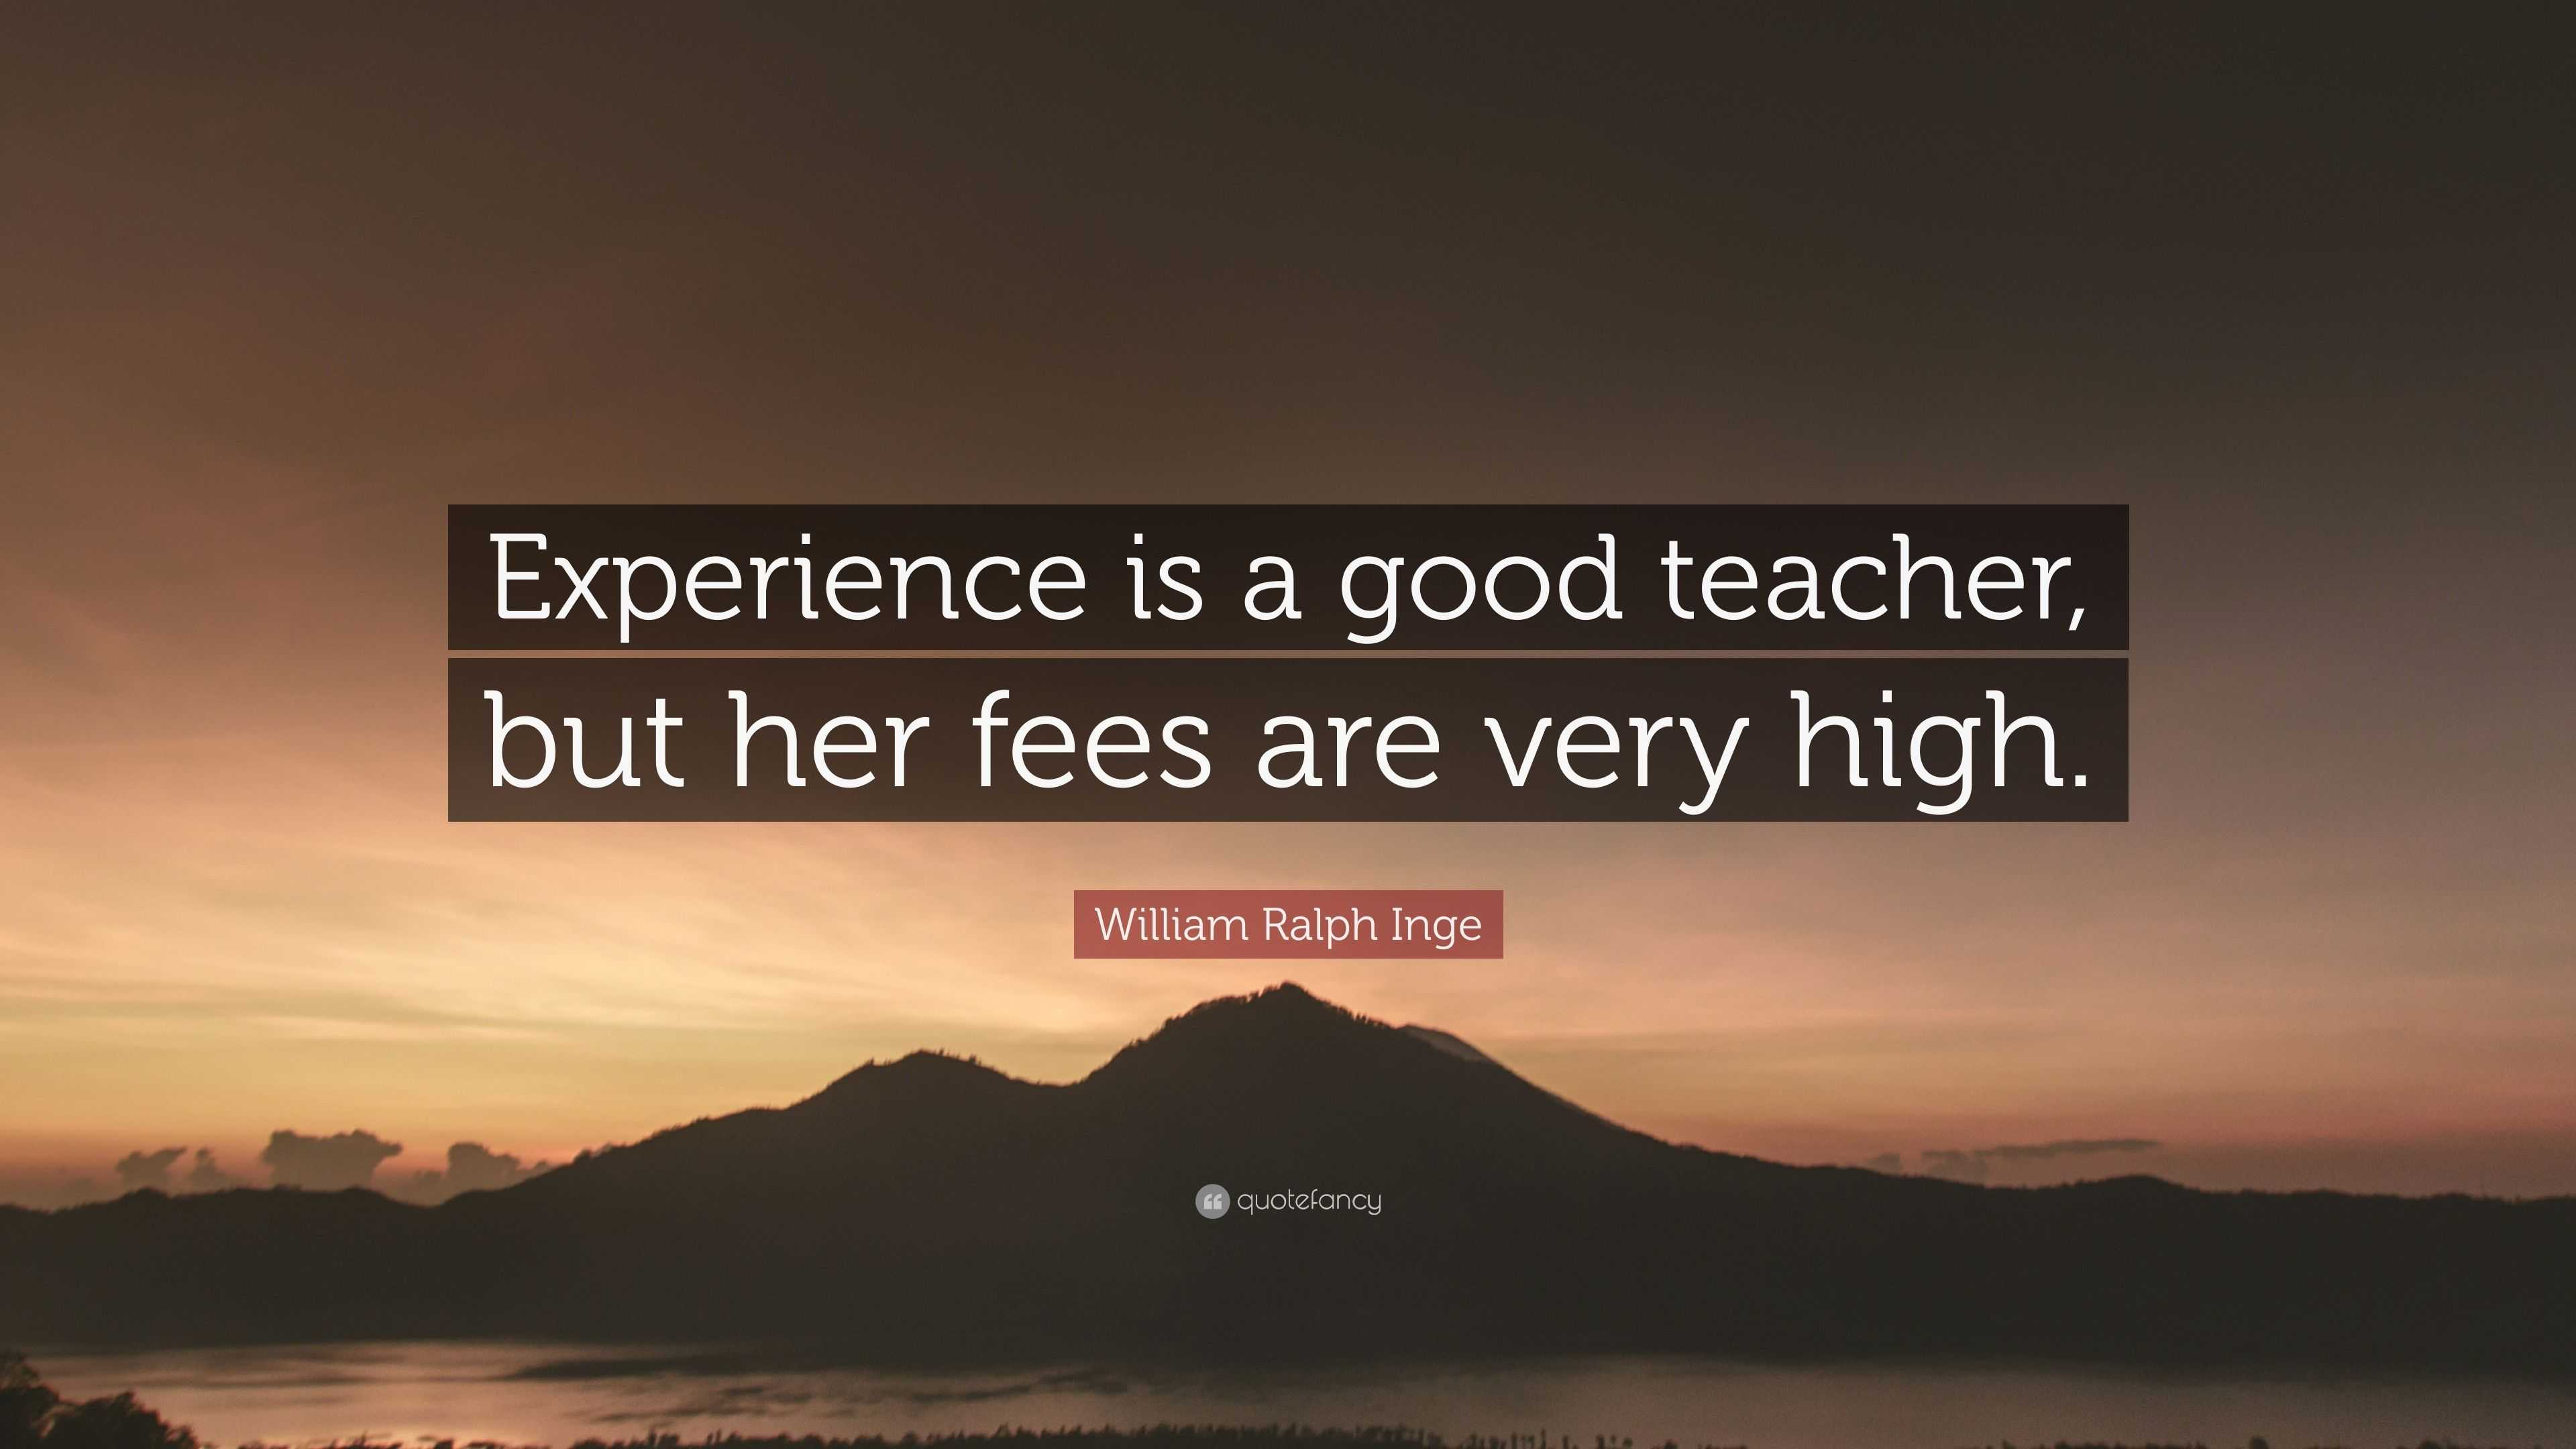 William Ralph Inge Quote: "Experience is a good teacher, but her fees are very high." (7 ...